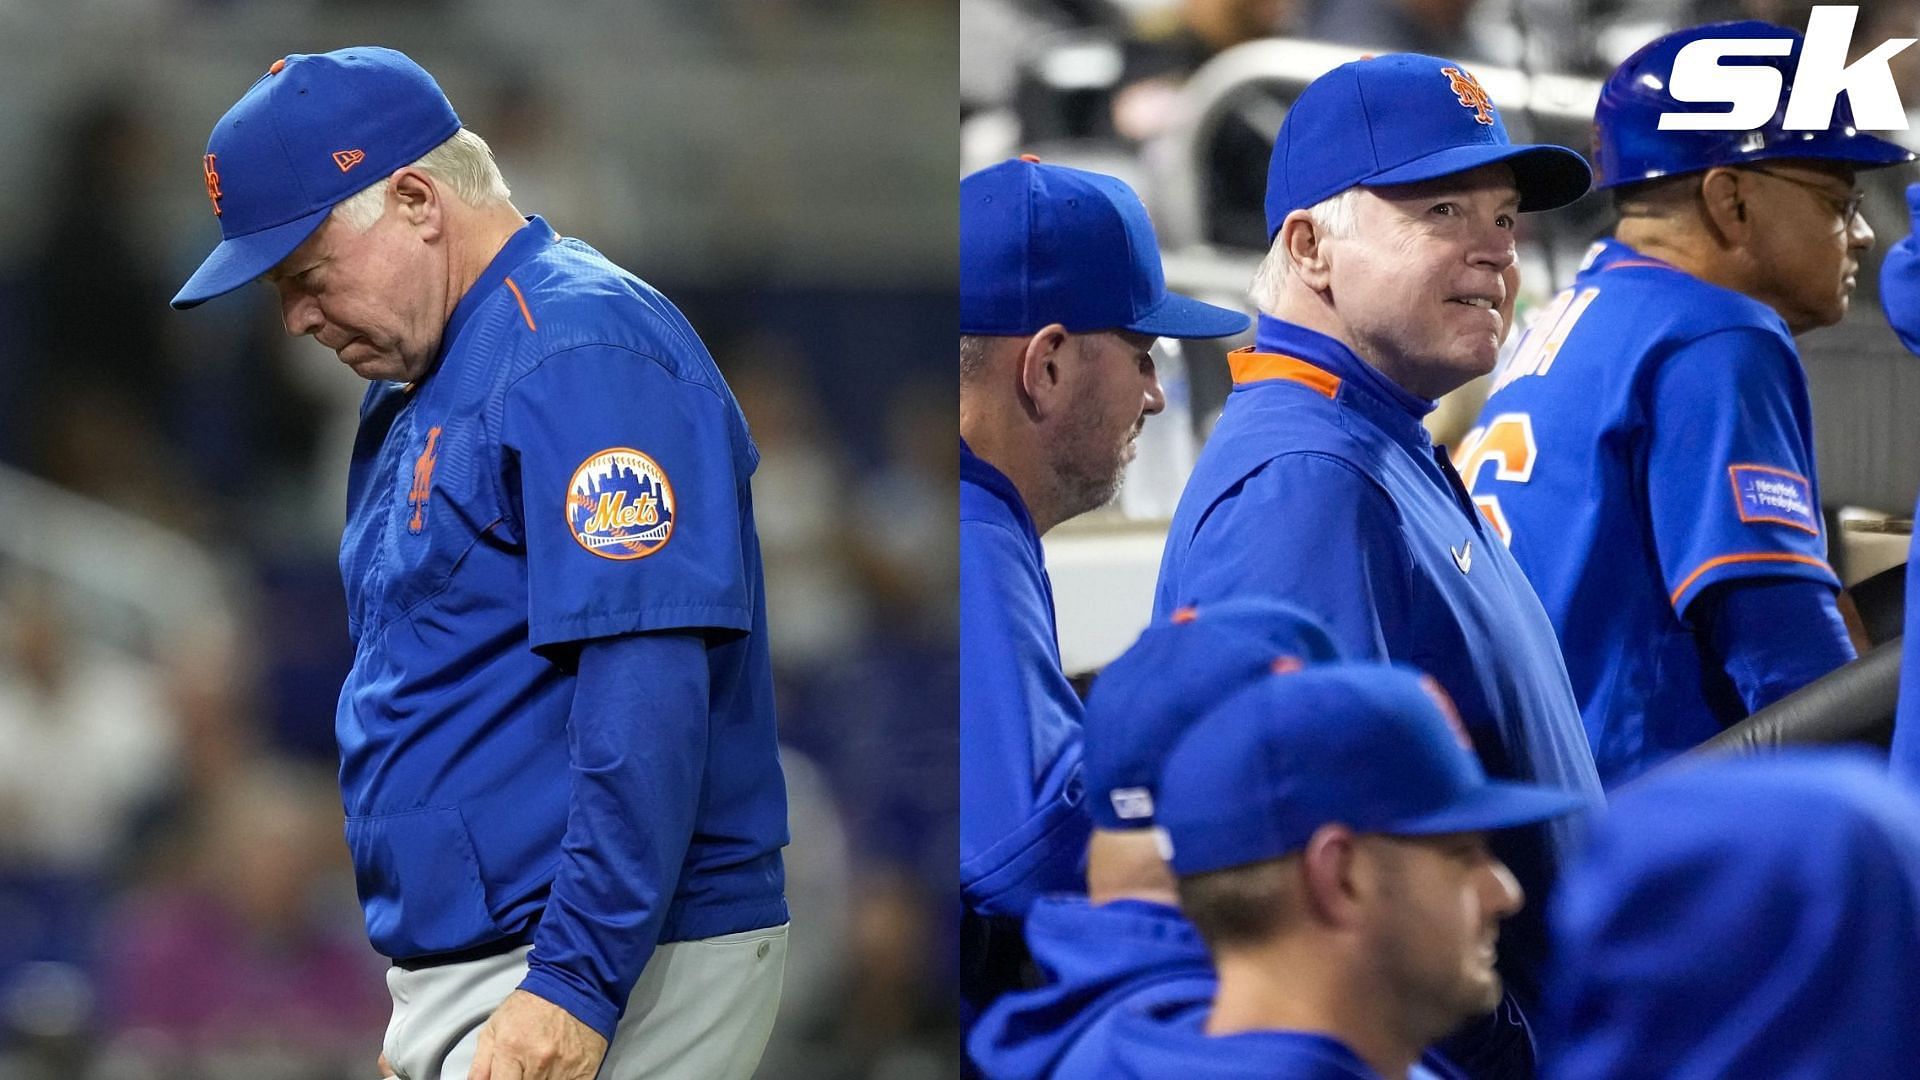 This Week in Mets: What are the good developments for the Mets